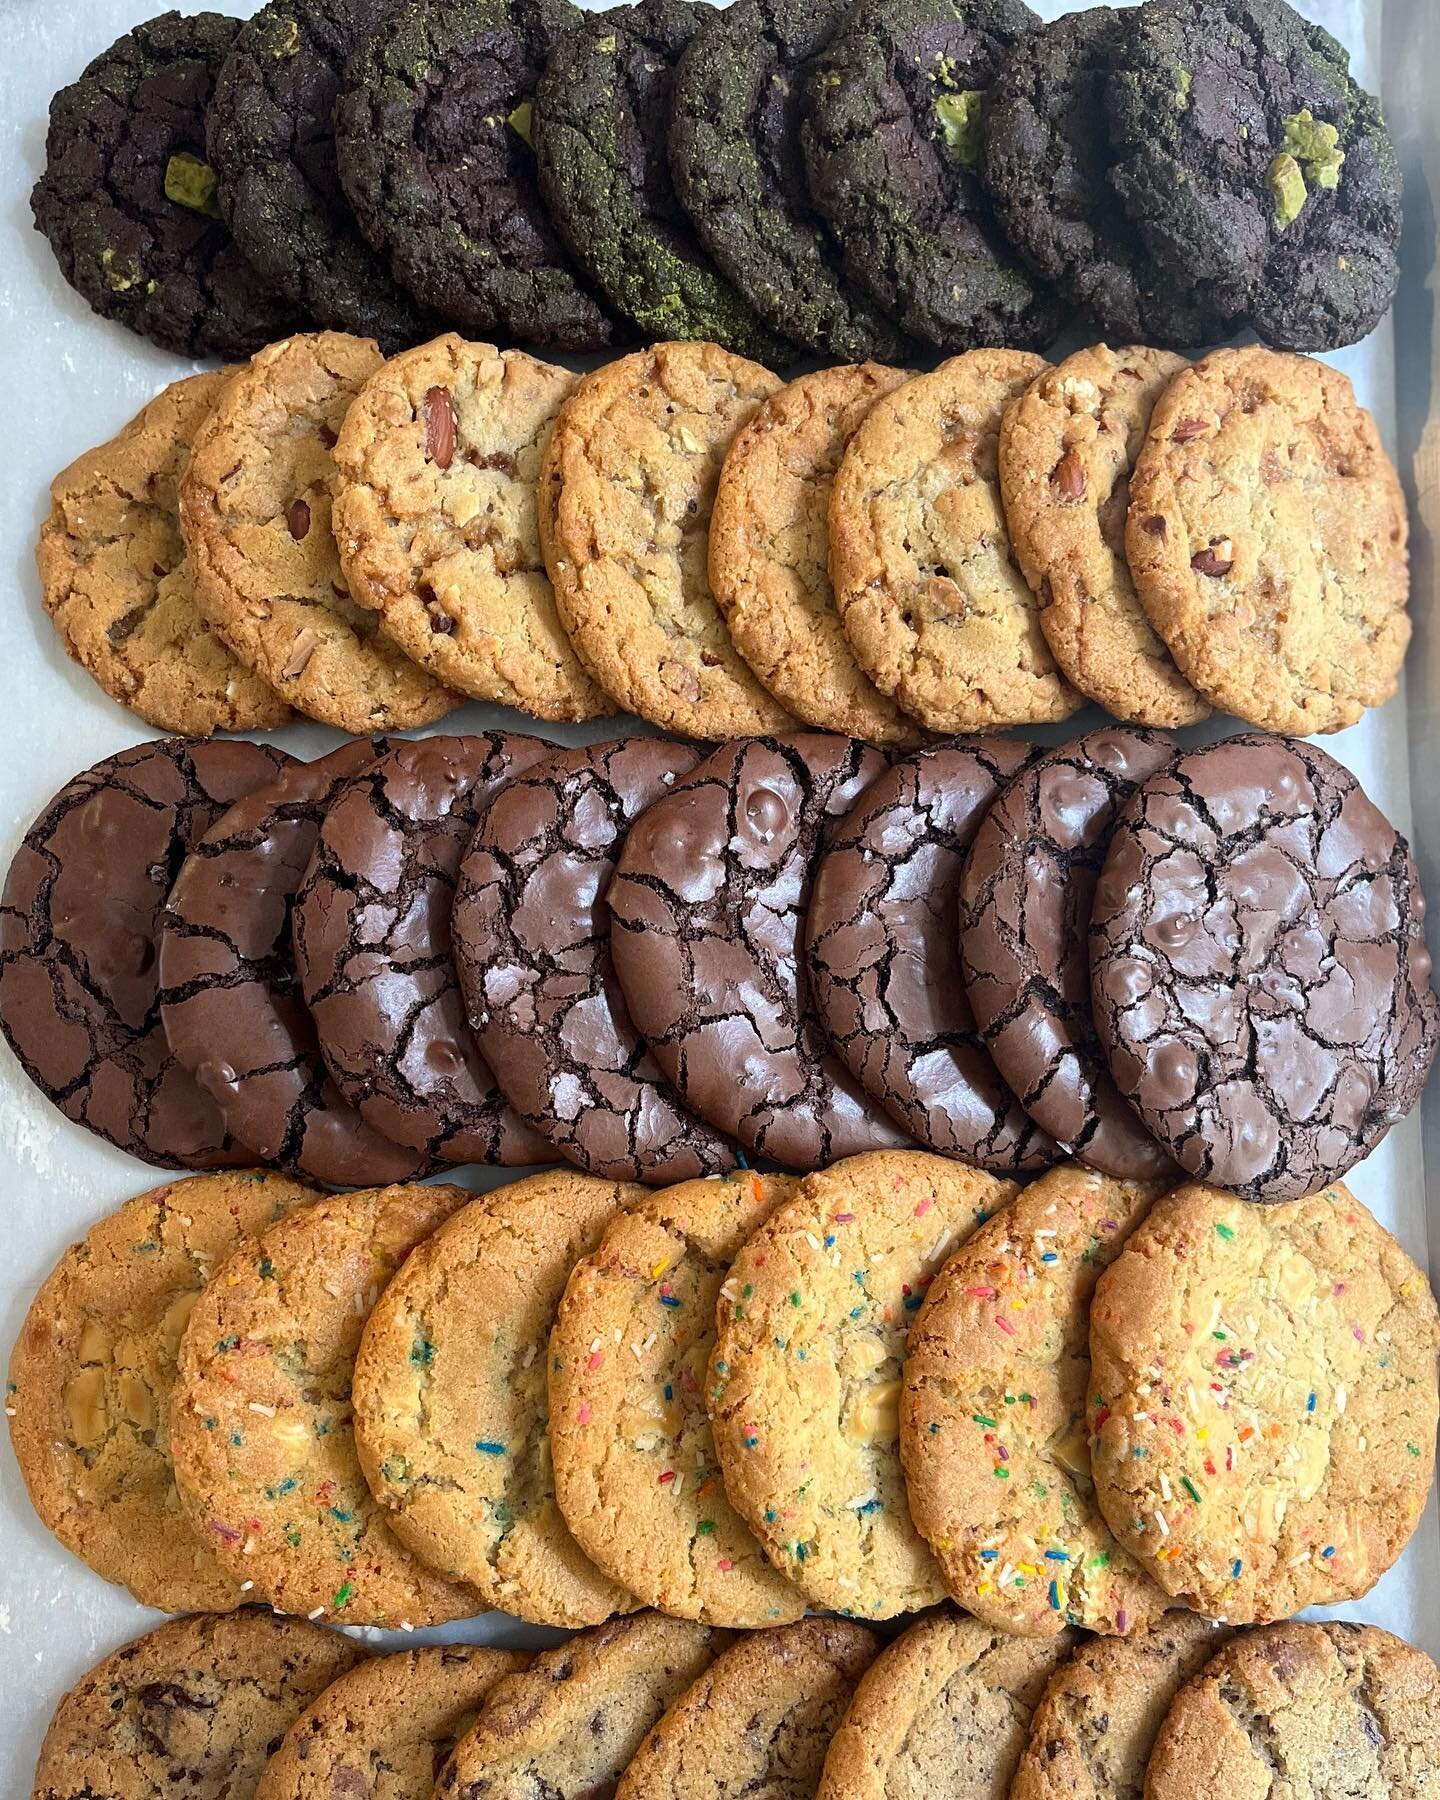 Cookies for every mood. ⁣
⁣
Maybe you&rsquo;re feeling crispy edges and chewy middles. Or you&rsquo;re jonesing for something buttery and crumbly. Perhaps you need something with a slighty chewy, fruity caramel center.⁣
⁣
My favourite changes weekly.